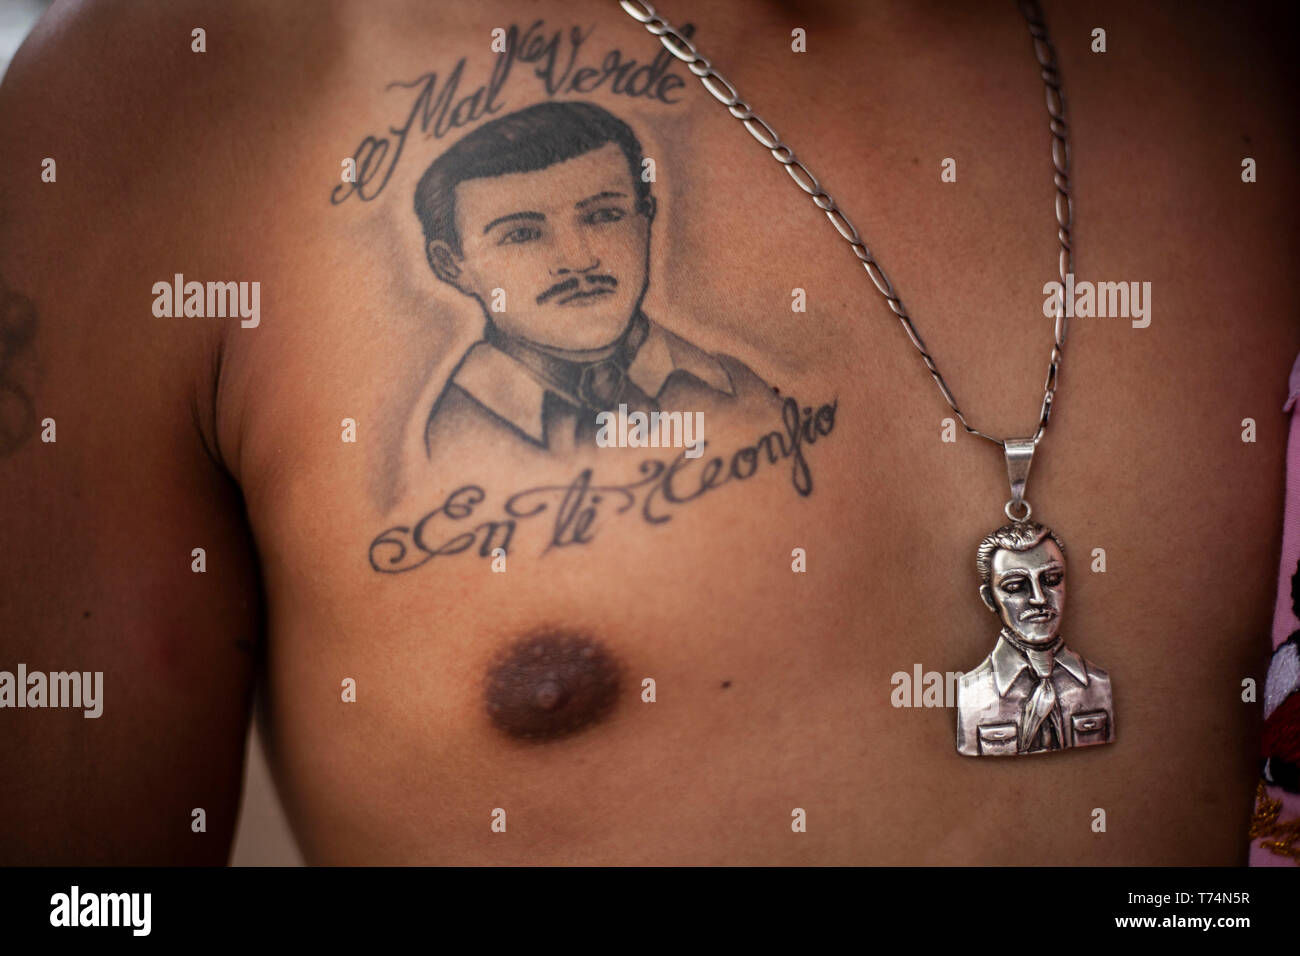 Culiacan, Mexico. 03rd May, 2019. A believer wears a medallion and has a tattoo of Jesus Malverde, who is considered a saint of drug bosses in Mexico. On the occasion of his 110th anniversary of death on 03.05.2019 numerous faithful gathered in his native town in the federal state of Sinaloa. Malverde, who is not recognized as a saint by the Catholic Church, is said to have been a highwayman during his lifetime. Many Mexicans worship him as a kind of Robin Hood. According to oral tradition, he robbed the rich families in the Sinaloa region and then distributed the booty among the poor. Credit: Stock Photo